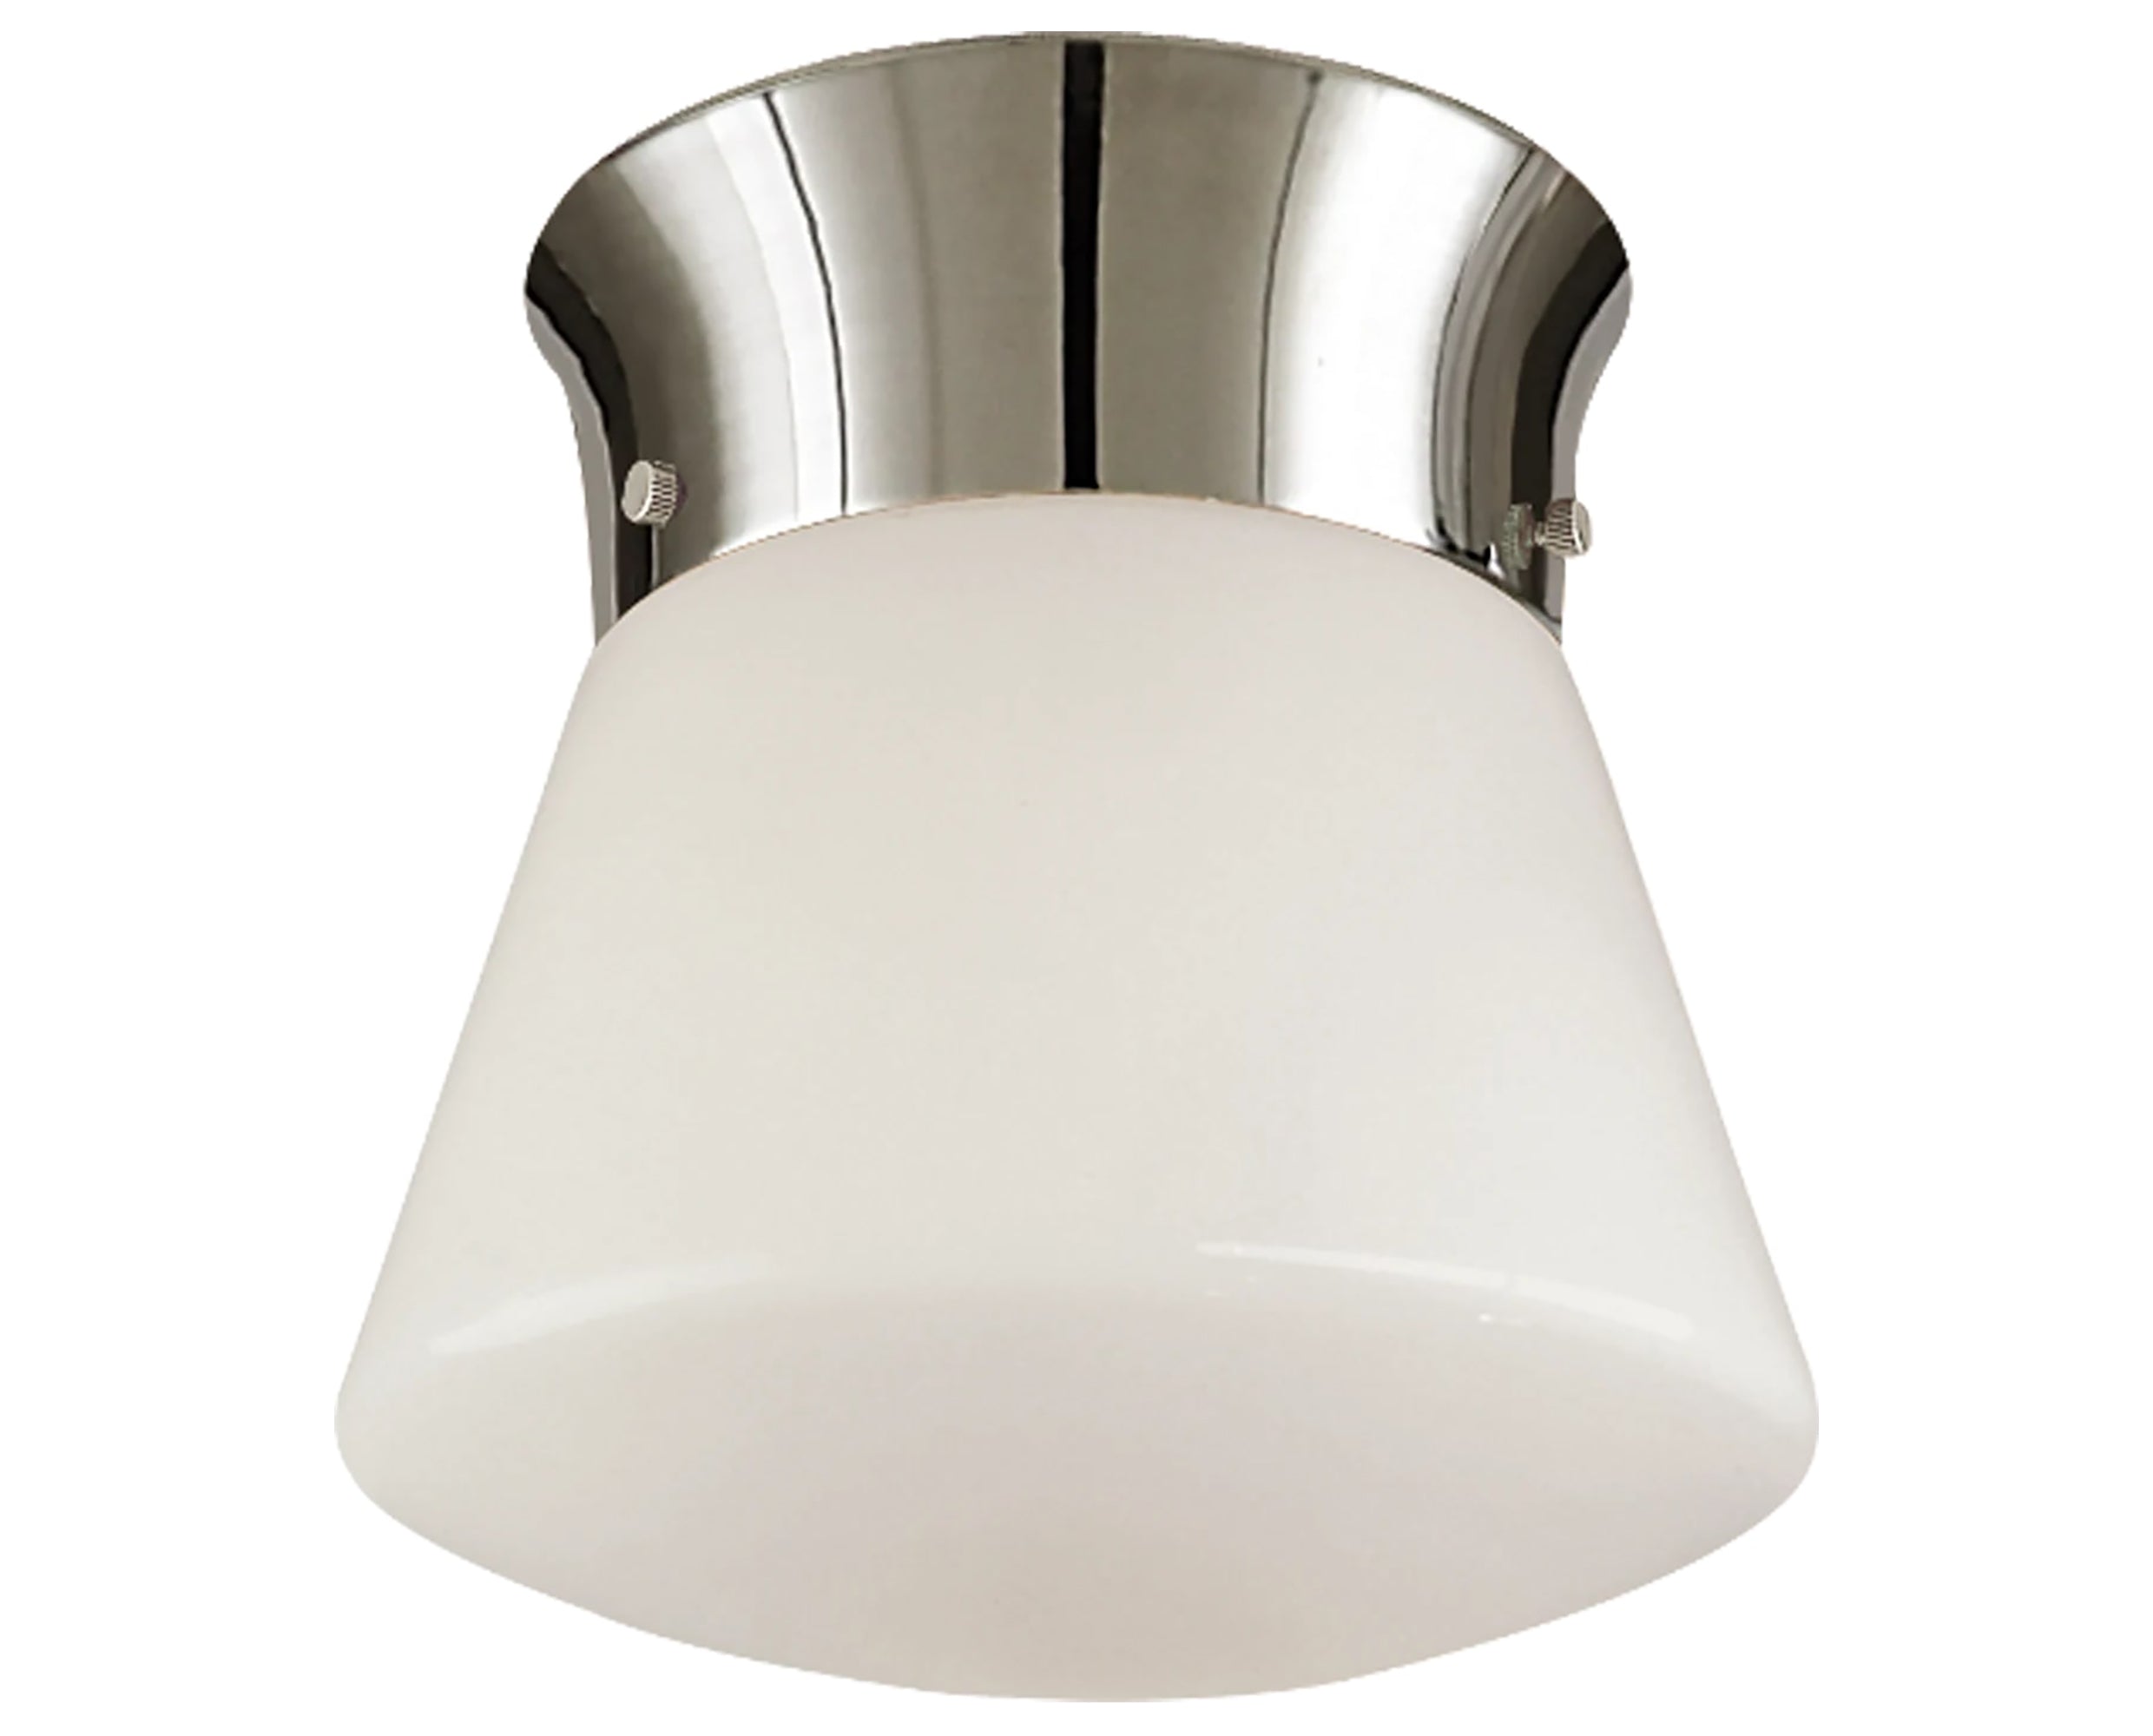 Polished Nickel &amp; White Glass | Perry Ceiling Light | Valley Ridge Furniture